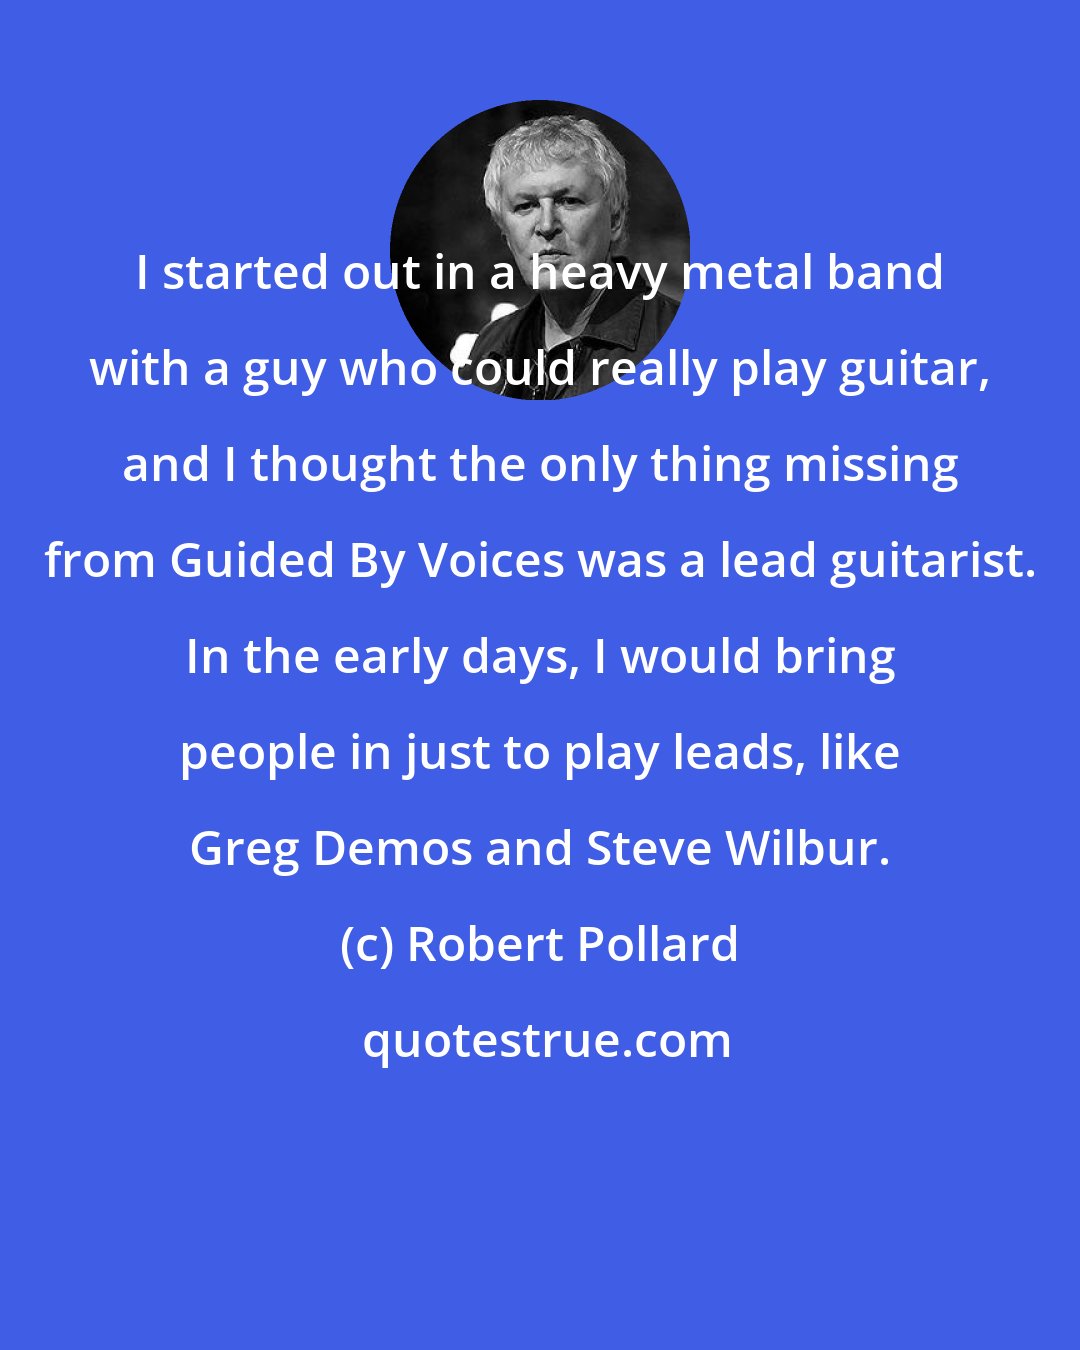 Robert Pollard: I started out in a heavy metal band with a guy who could really play guitar, and I thought the only thing missing from Guided By Voices was a lead guitarist. In the early days, I would bring people in just to play leads, like Greg Demos and Steve Wilbur.